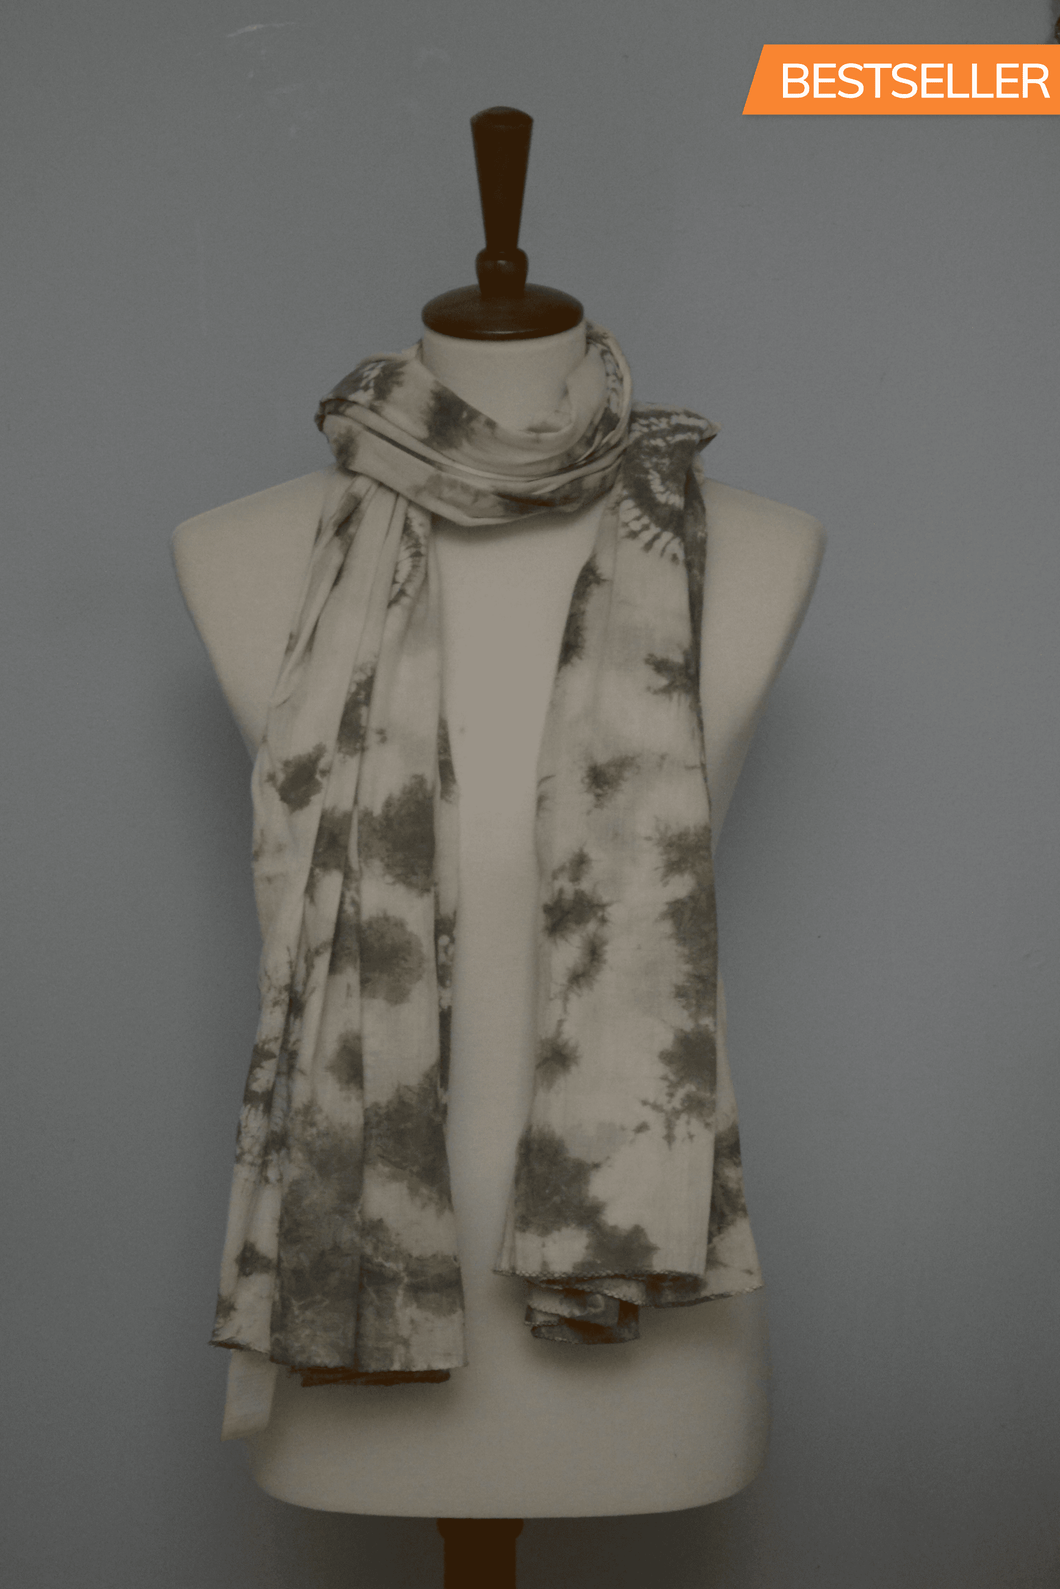 Naturally dyed cotton scarf